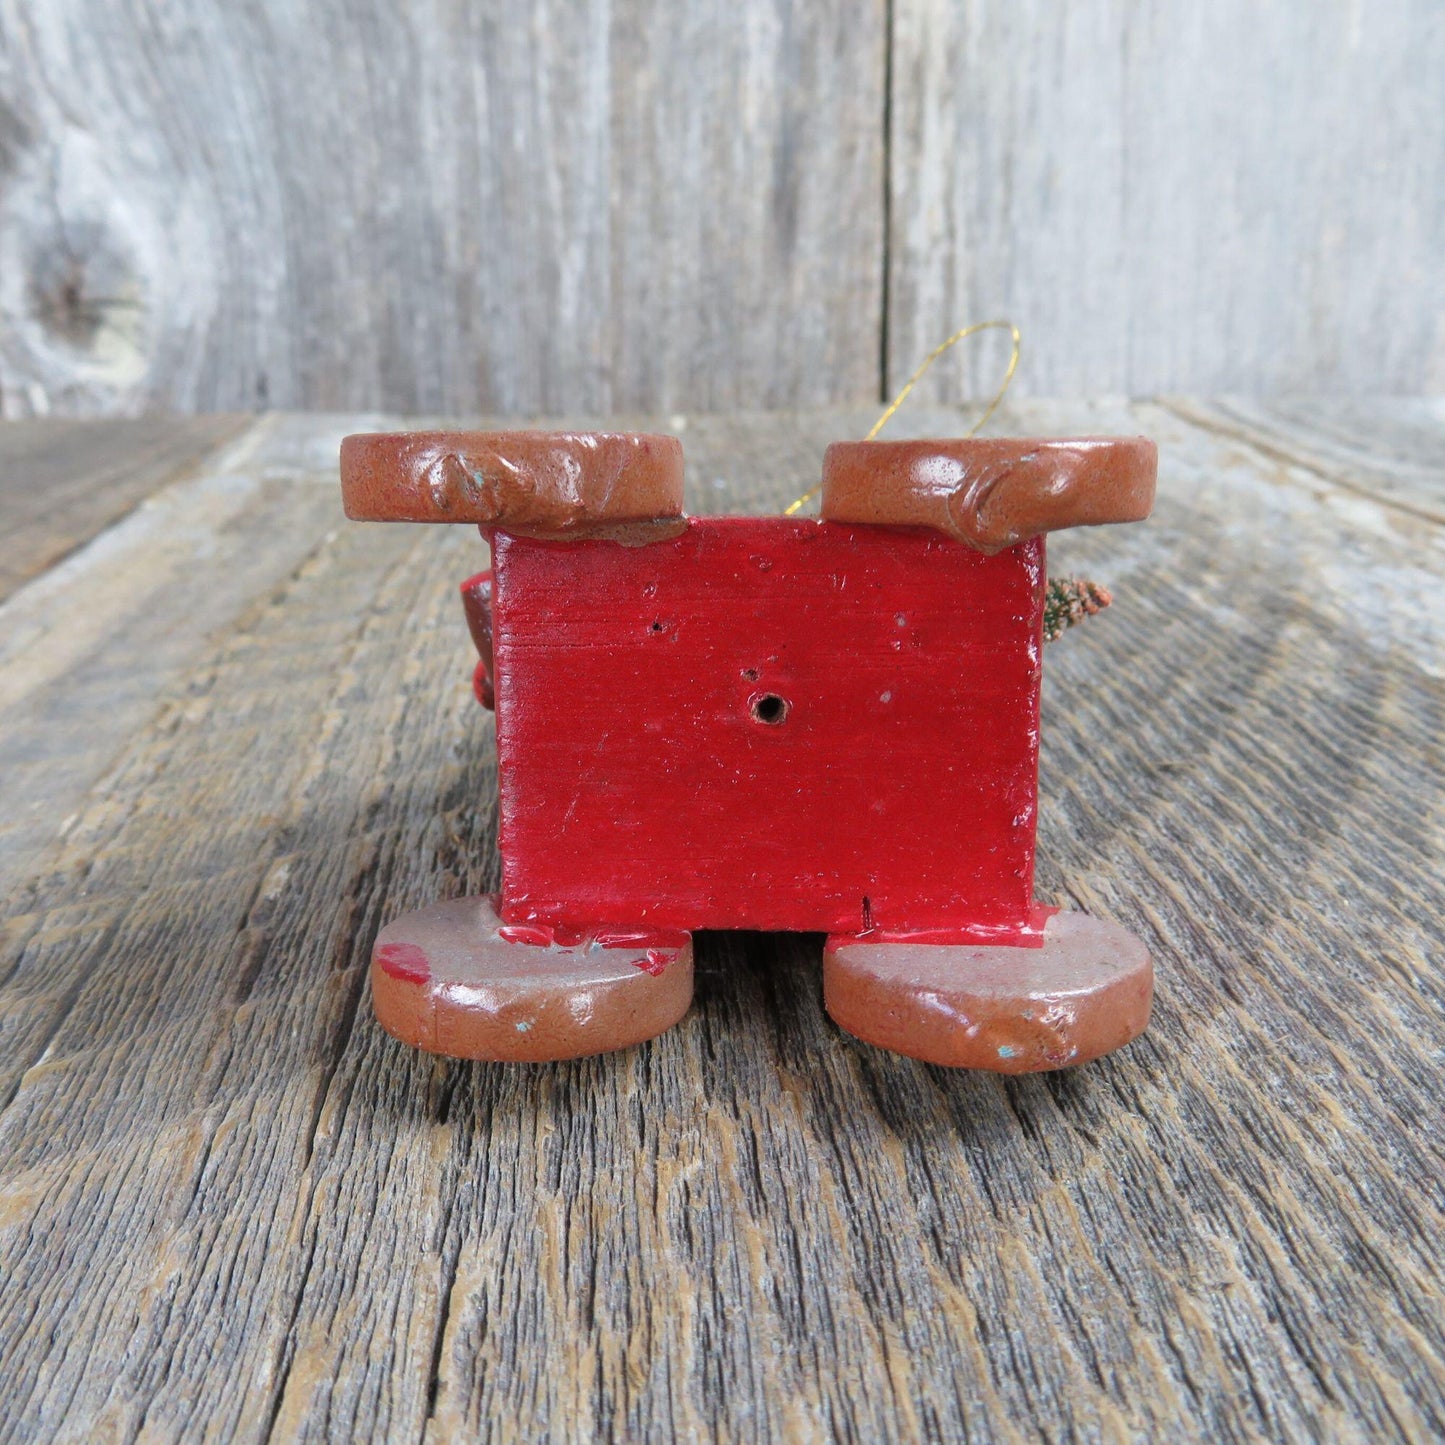 Vintage Wooden Teddy Bear In Wagon Ornament Wood Christmas Red Brush Tree Gift Russ